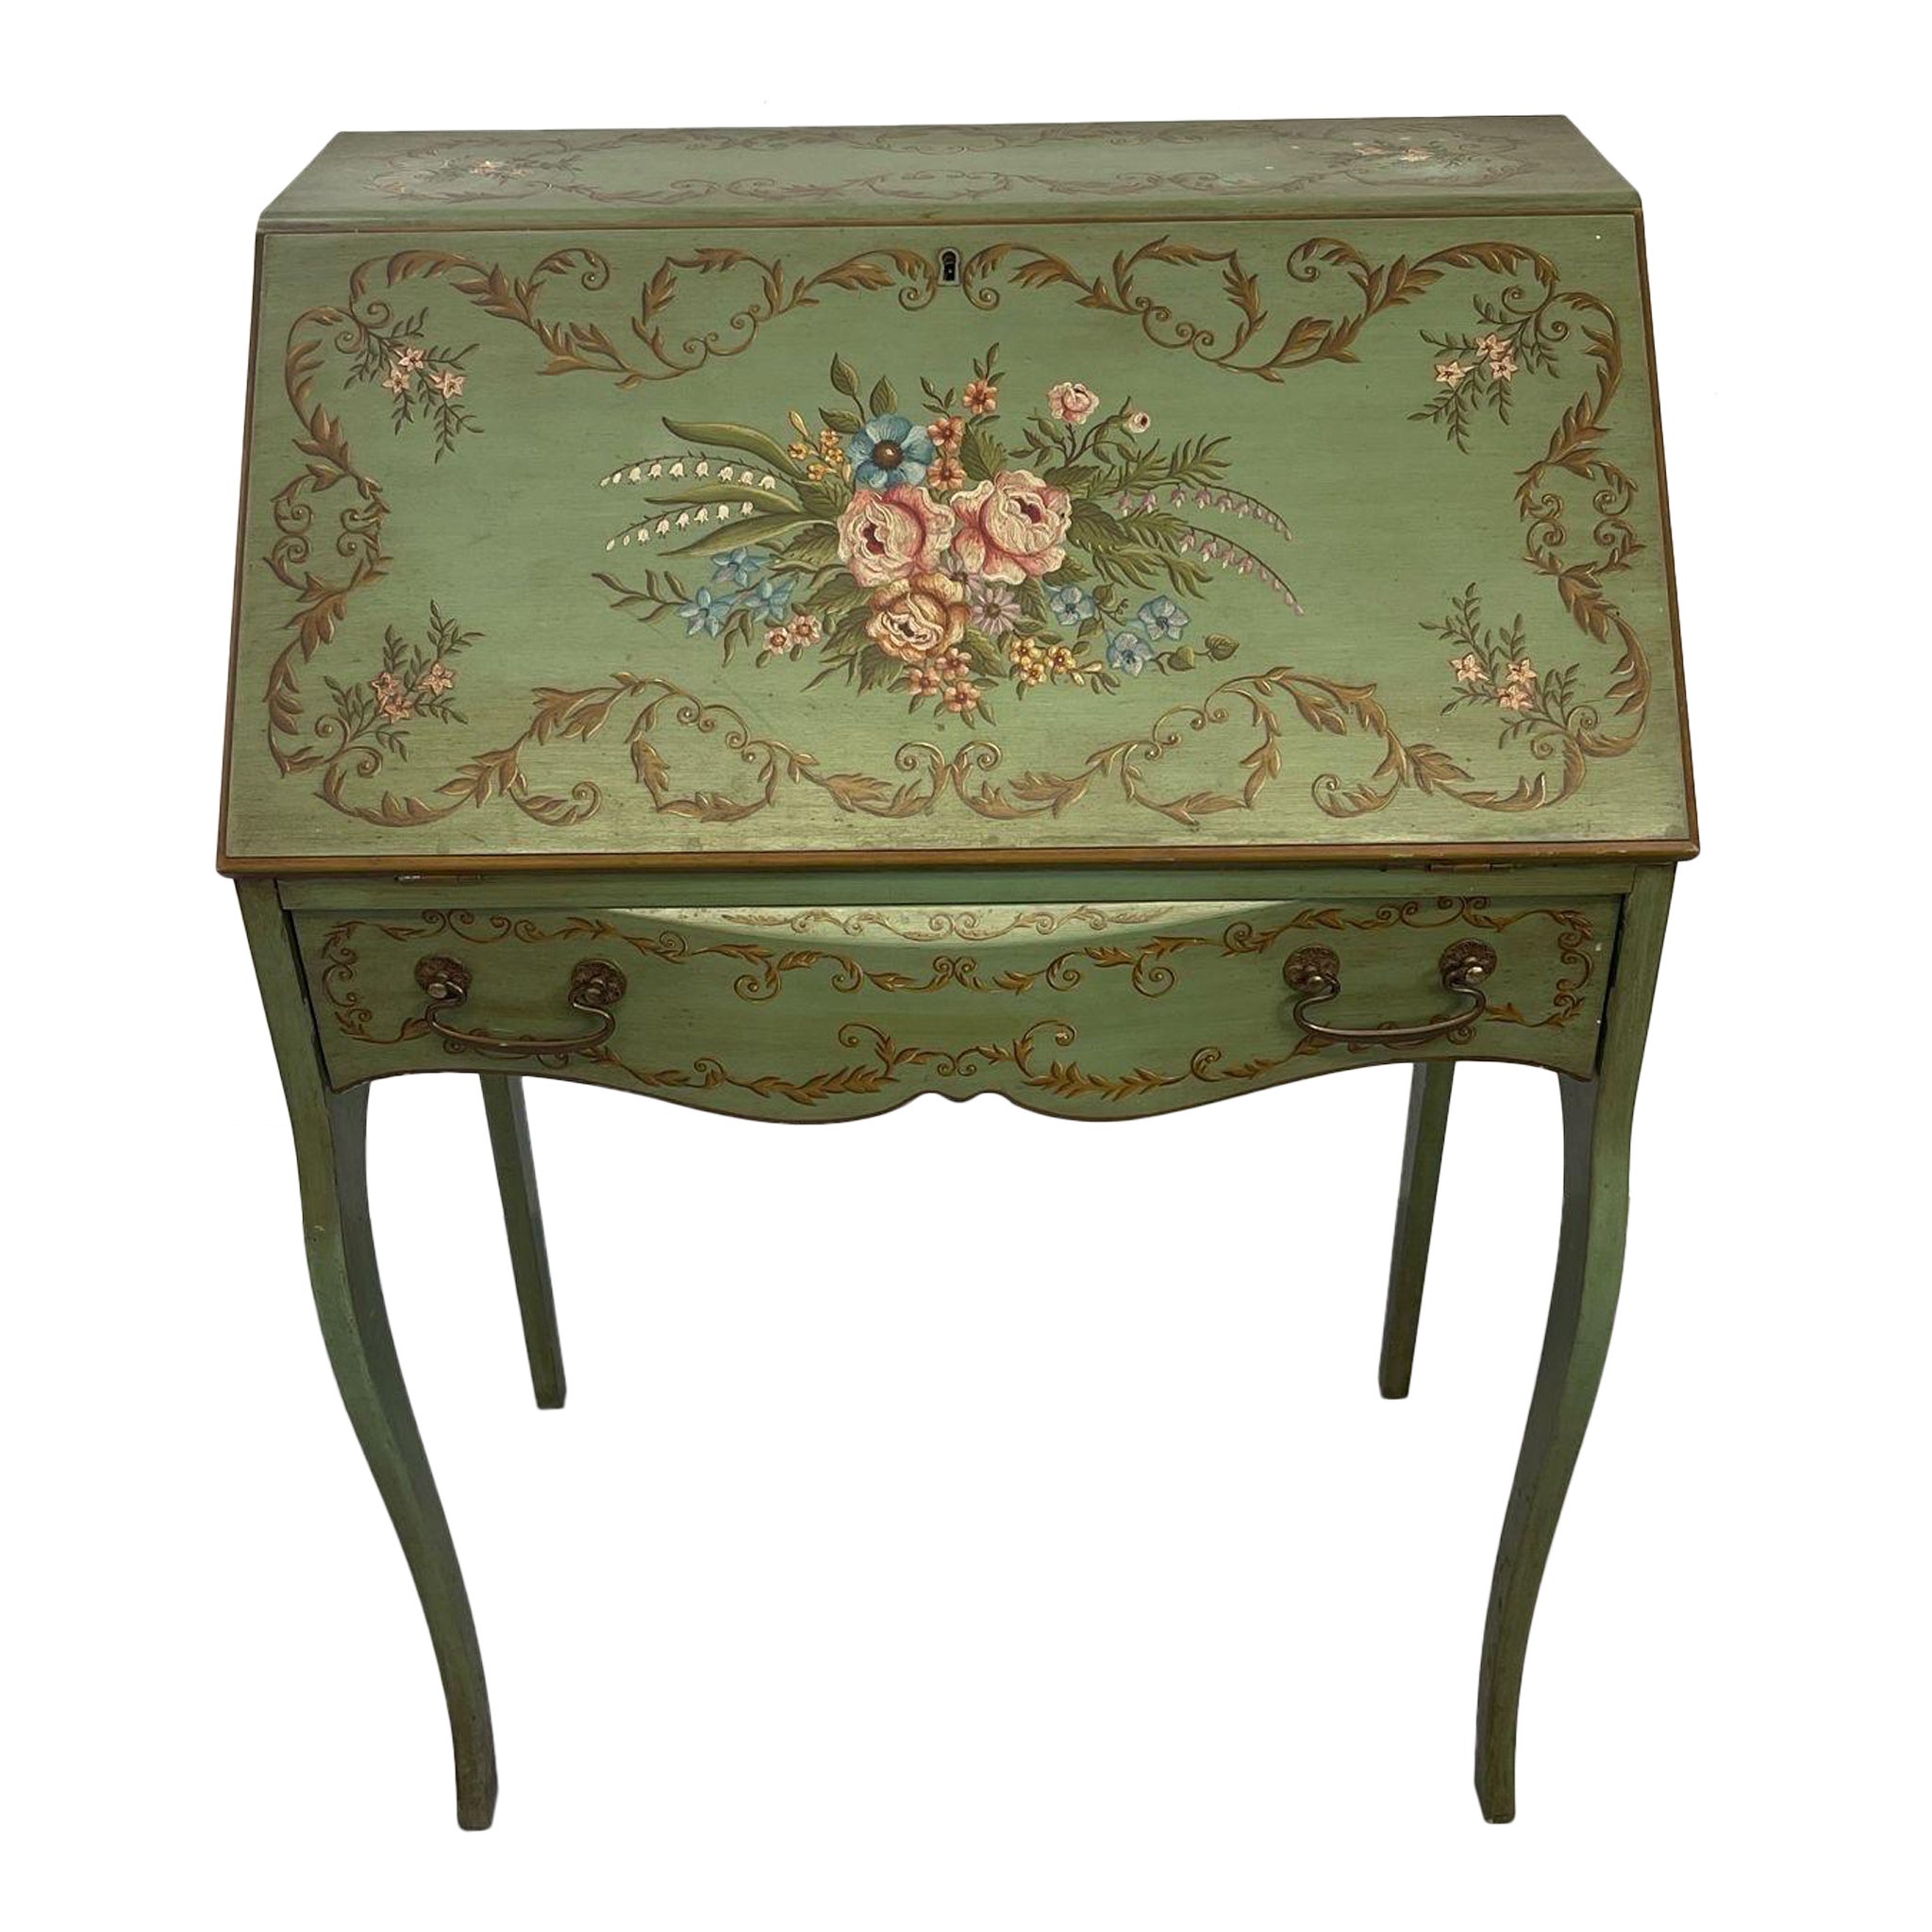 Vintage French Regency Style Bureau Desk With HandPainted Floral Motif and chair For Sale